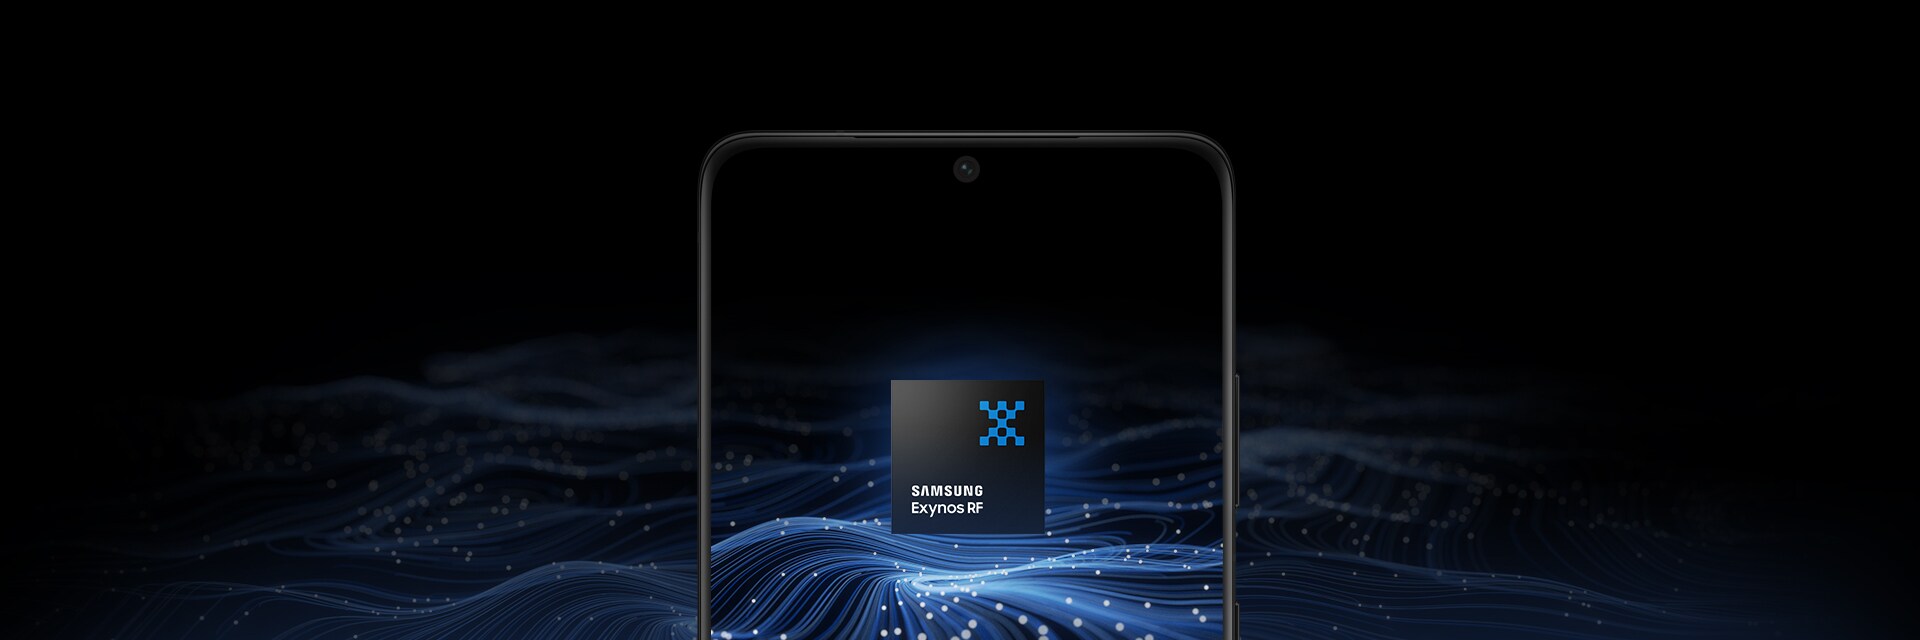 Samsung Semiconductor Processor, Exynos RF, Excellent Partner for Multiband